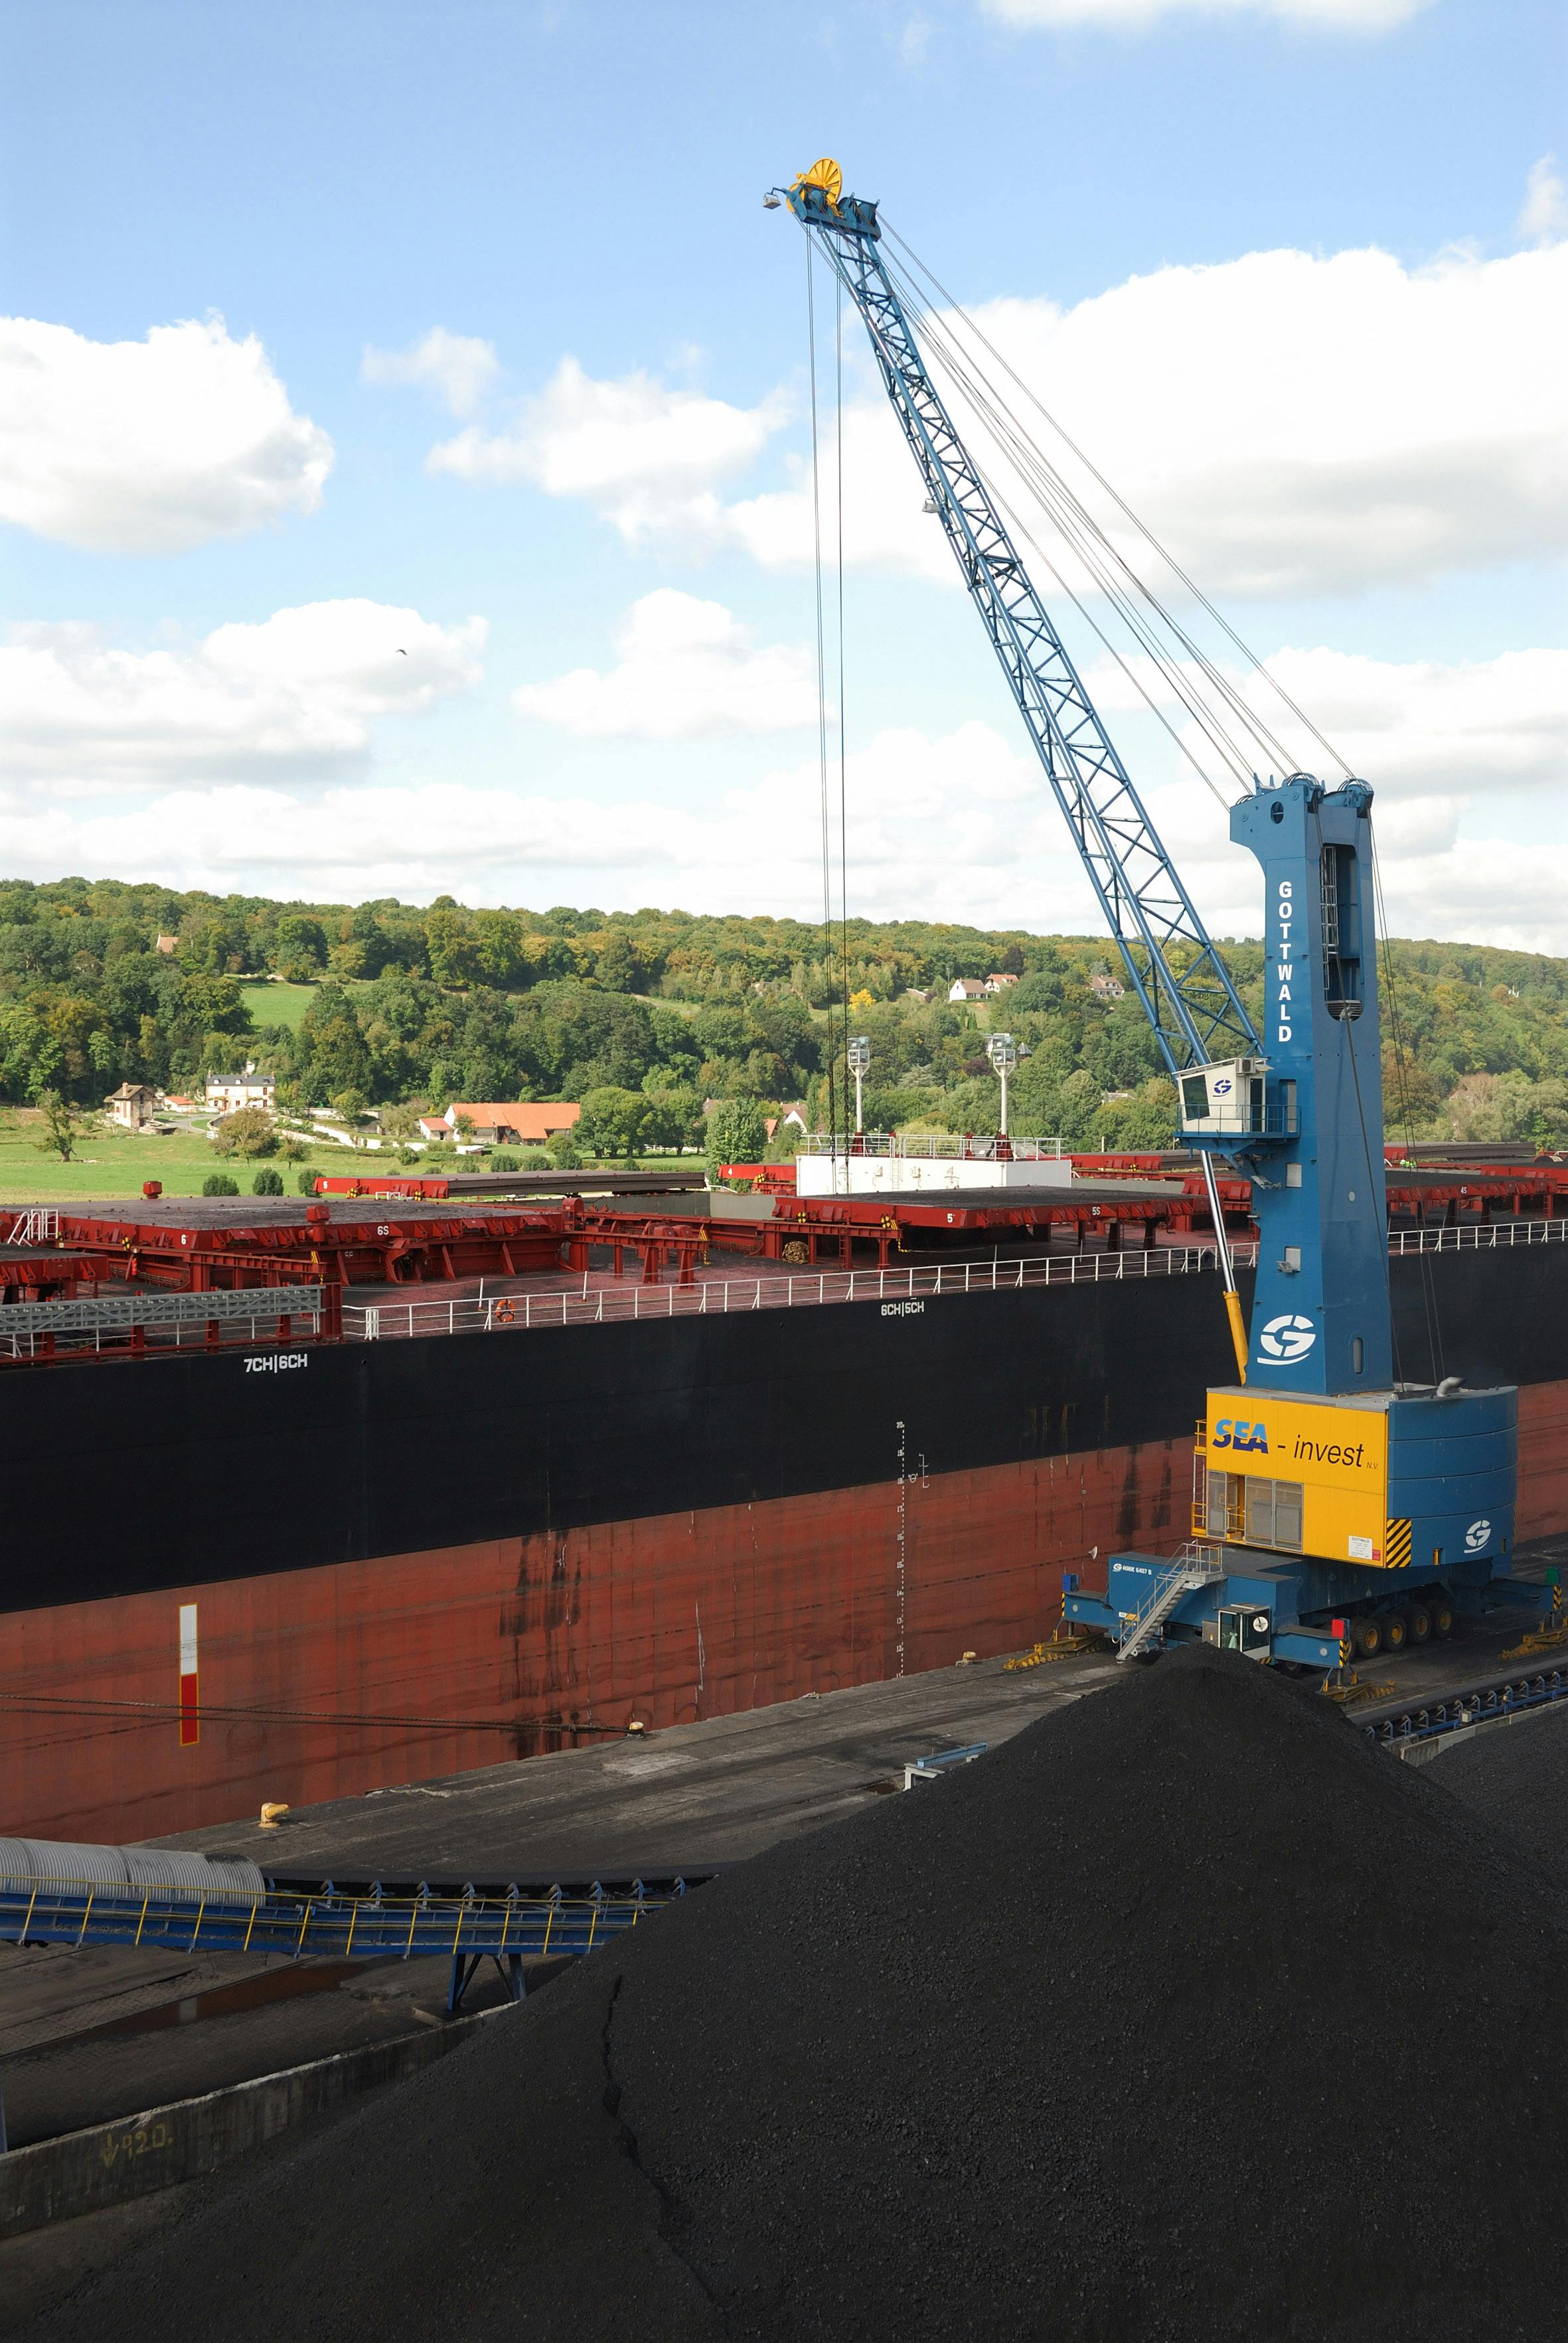 Demag to Supply Two Mobile Harbor Cranes to Canada